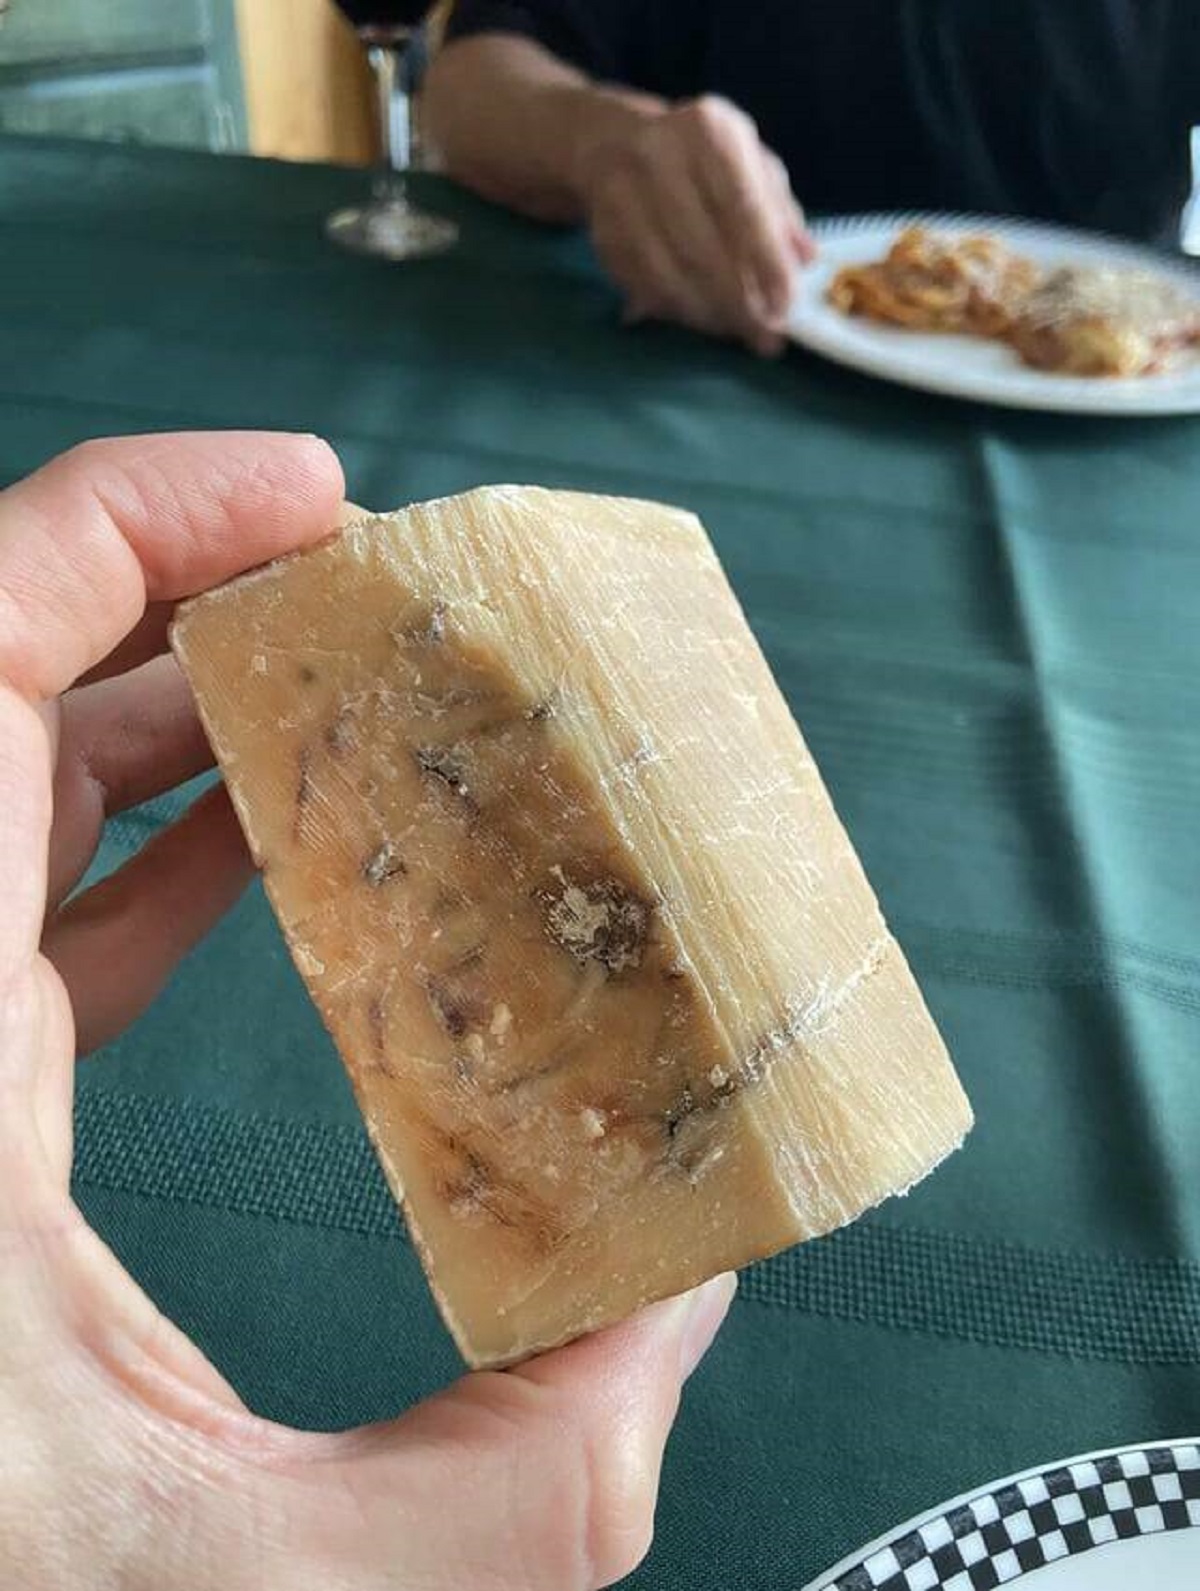 "My step dad has kept the same piece of Parmesan cheese for over 10 years"